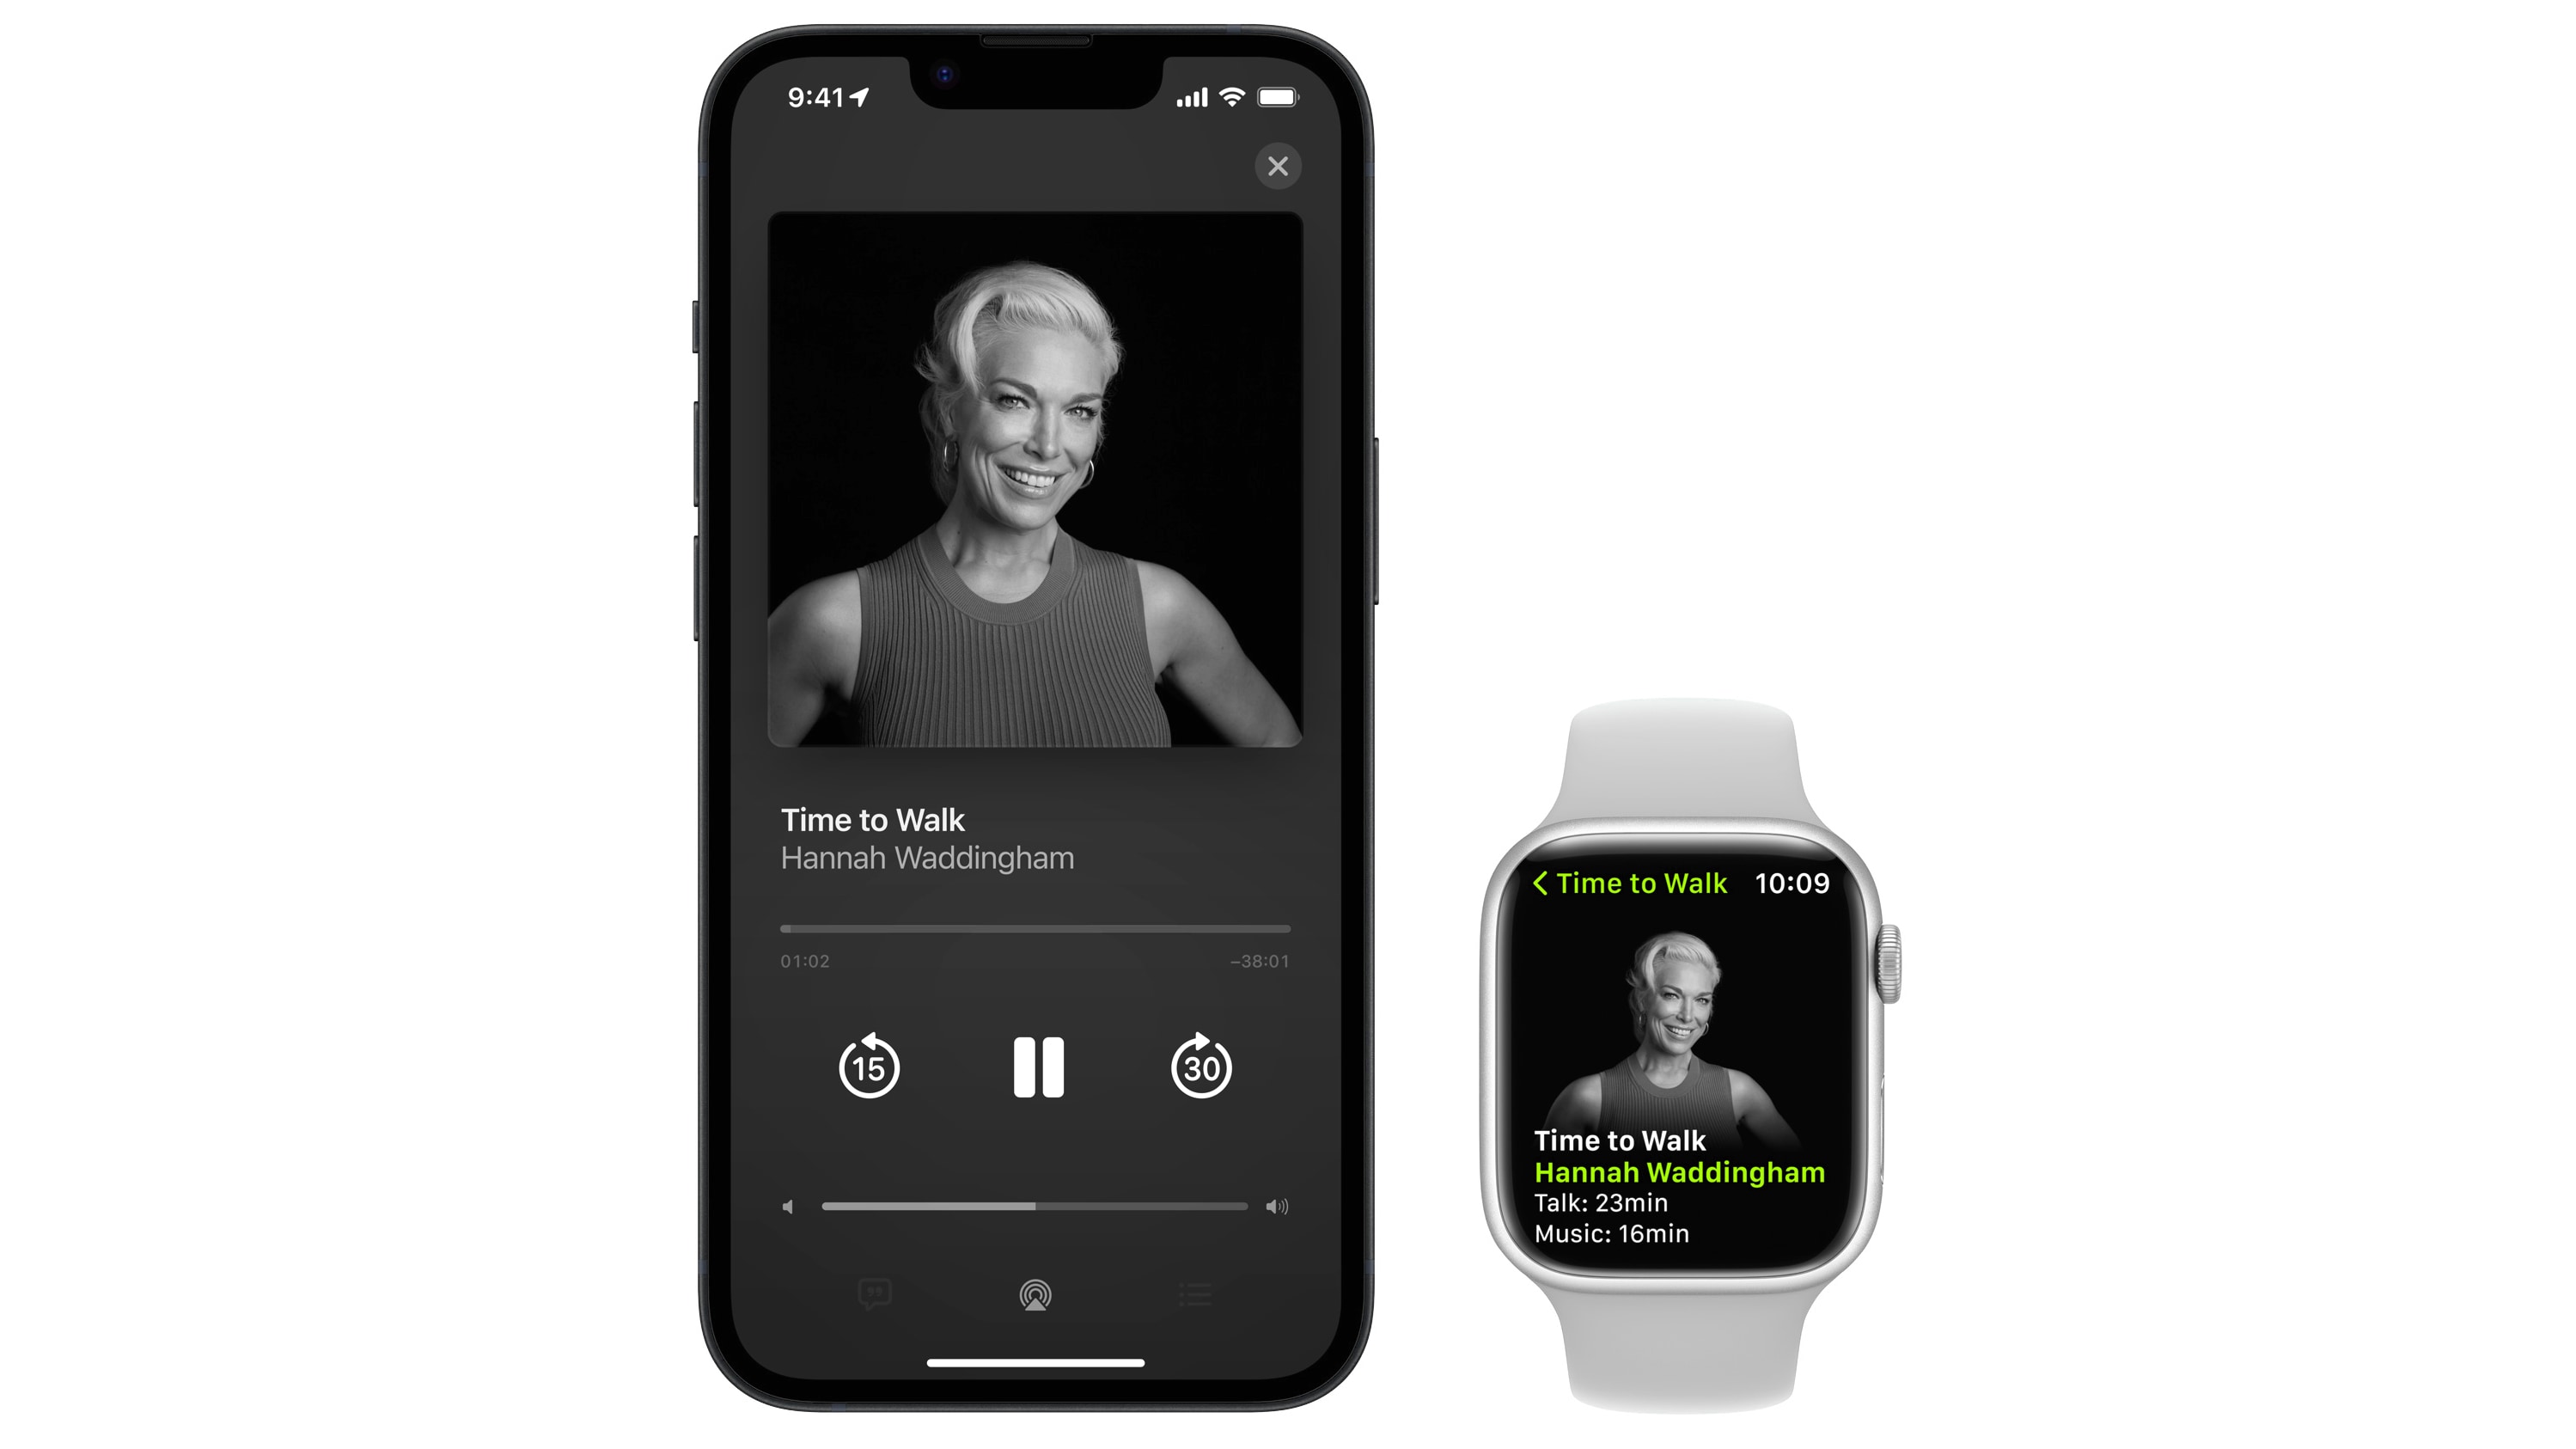 Apple Fitness+ on iPhone and Apple Watch playing a Time to Walk episode featuring Hannah Waddingham